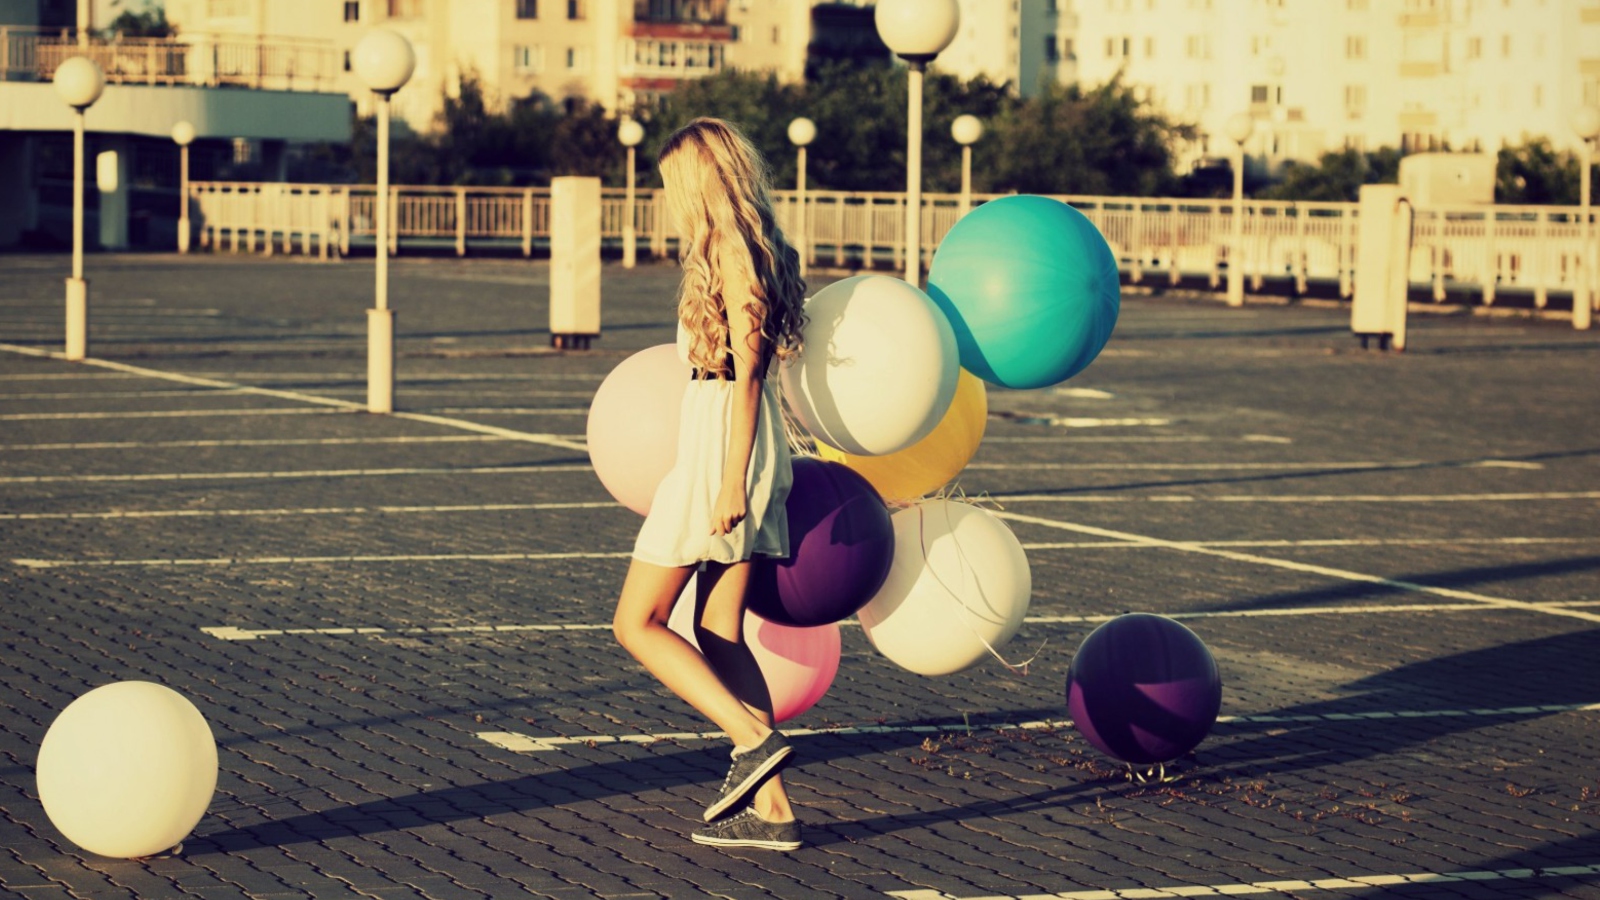 Happy Girl With Colorful Balloons screenshot #1 1600x900